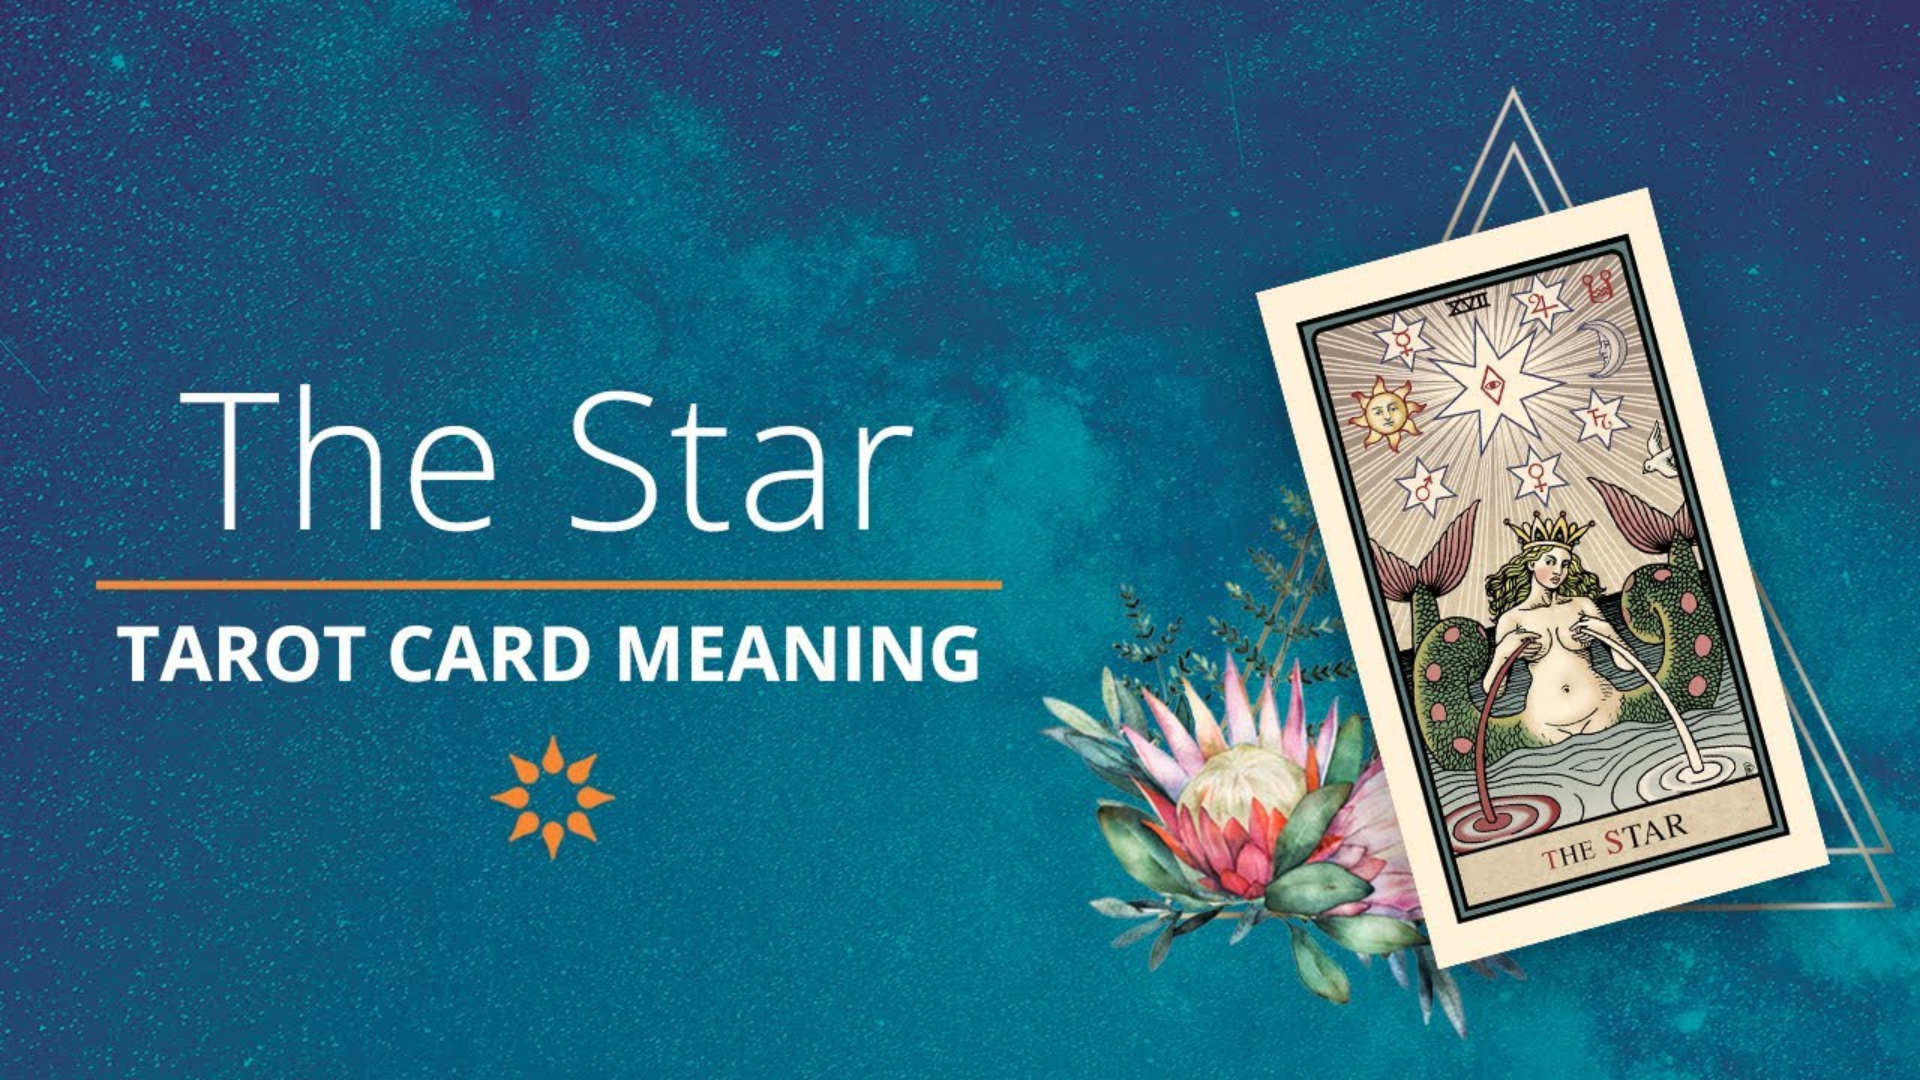 A star tarot cars on the right wih a flower beside it and words The Star Tarot Card Meaning And Significance